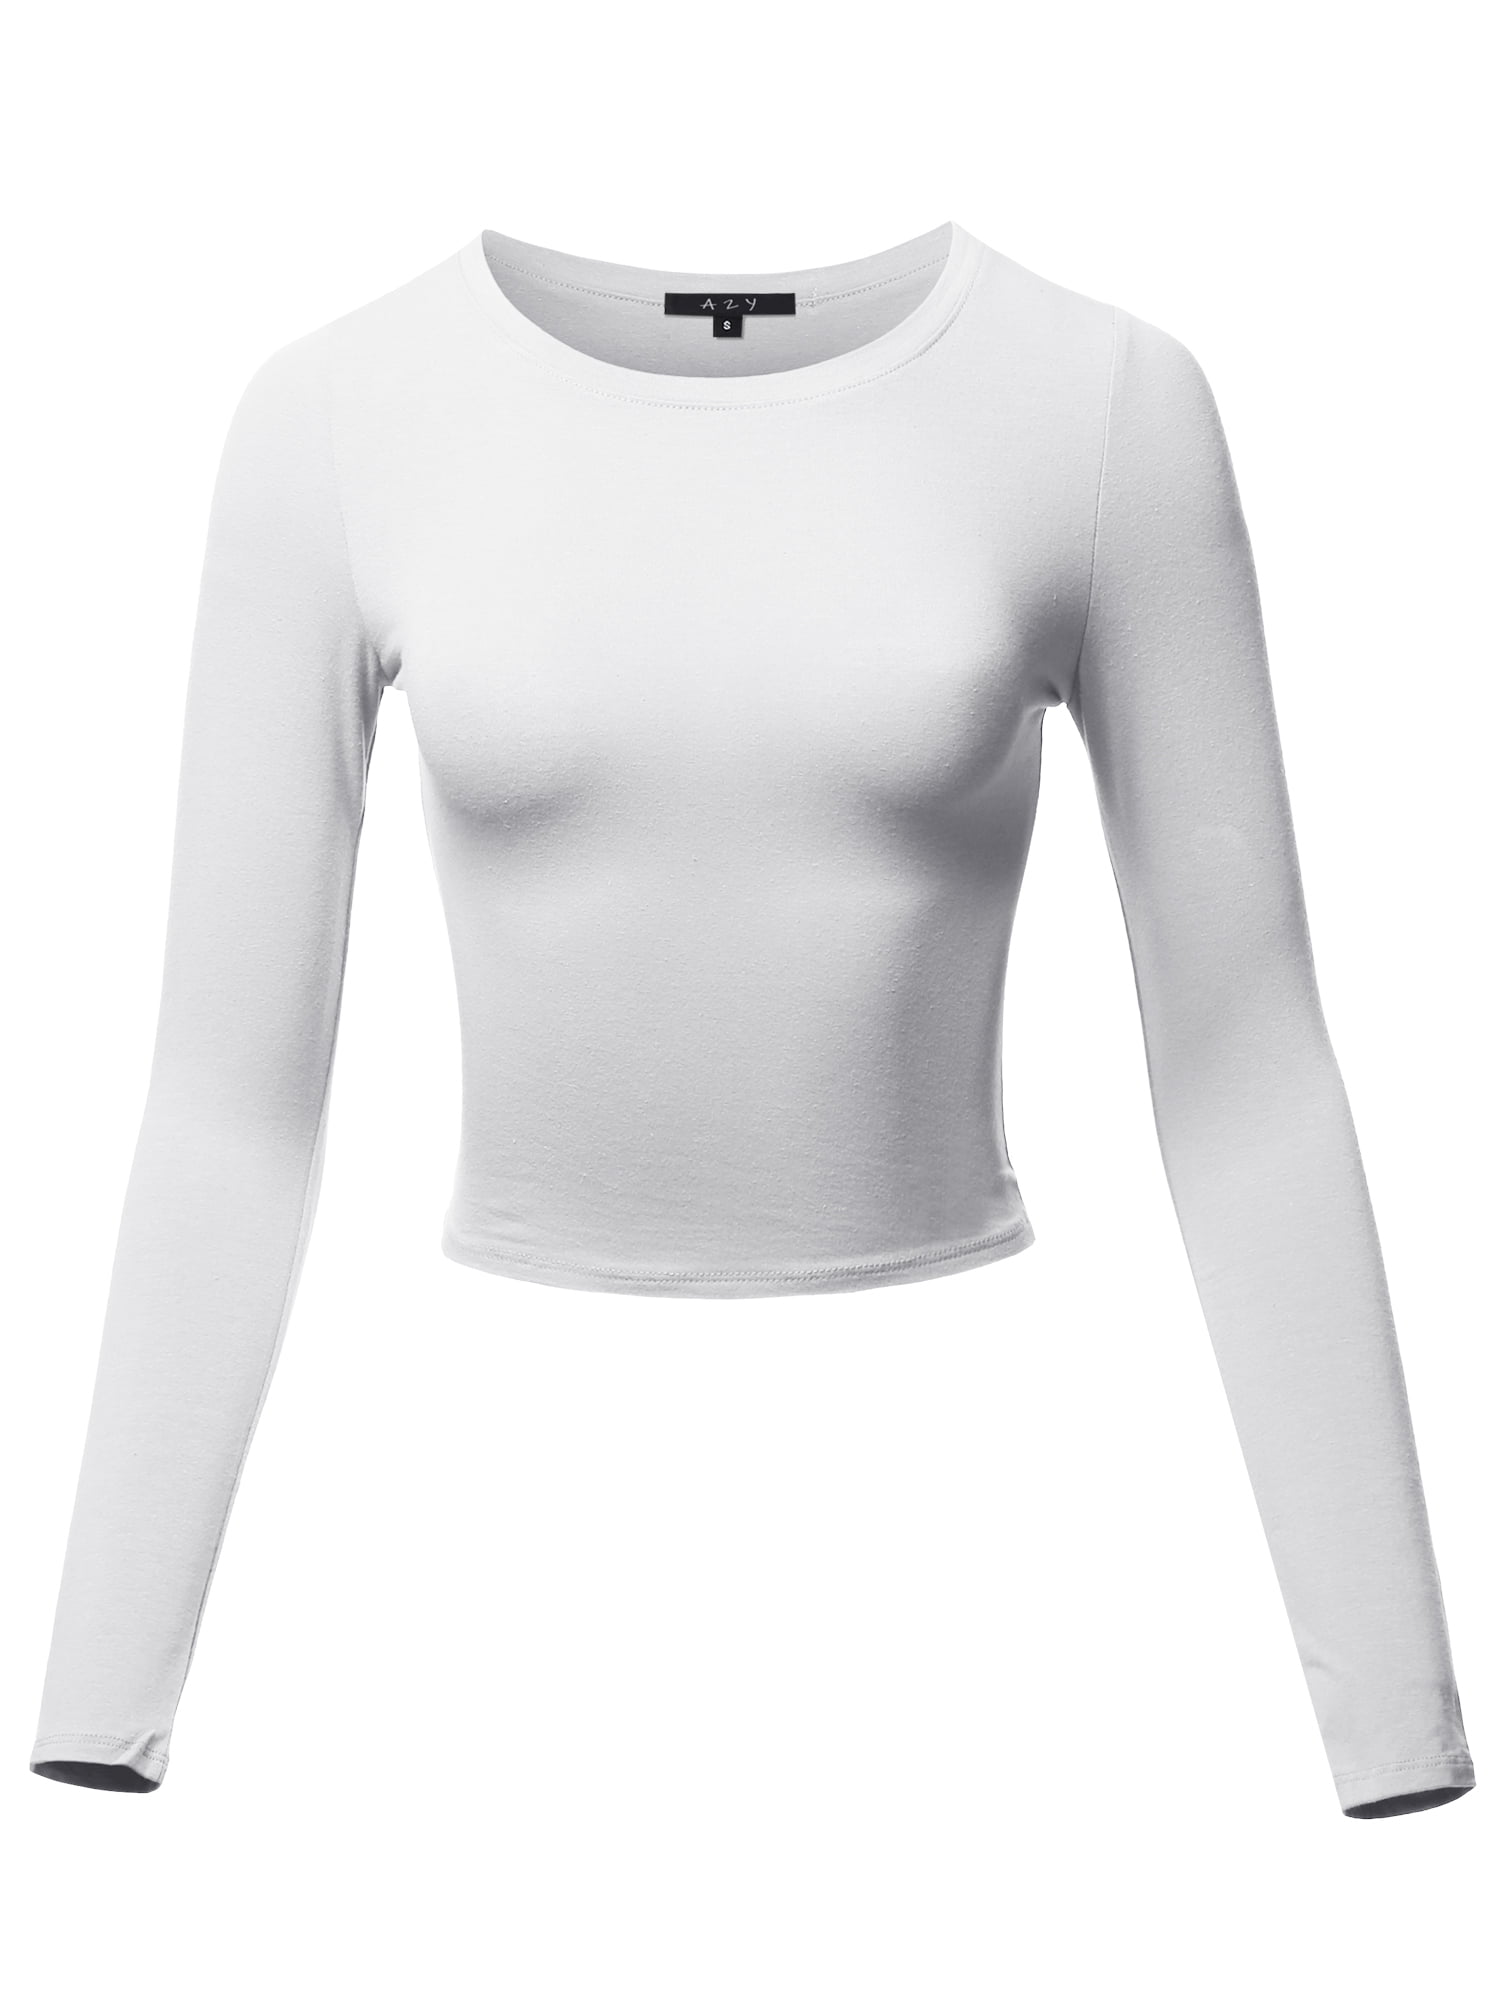 A2Y Women's Basic Solid Stretchable Crew Neck Long Sleeve Crop Top ...